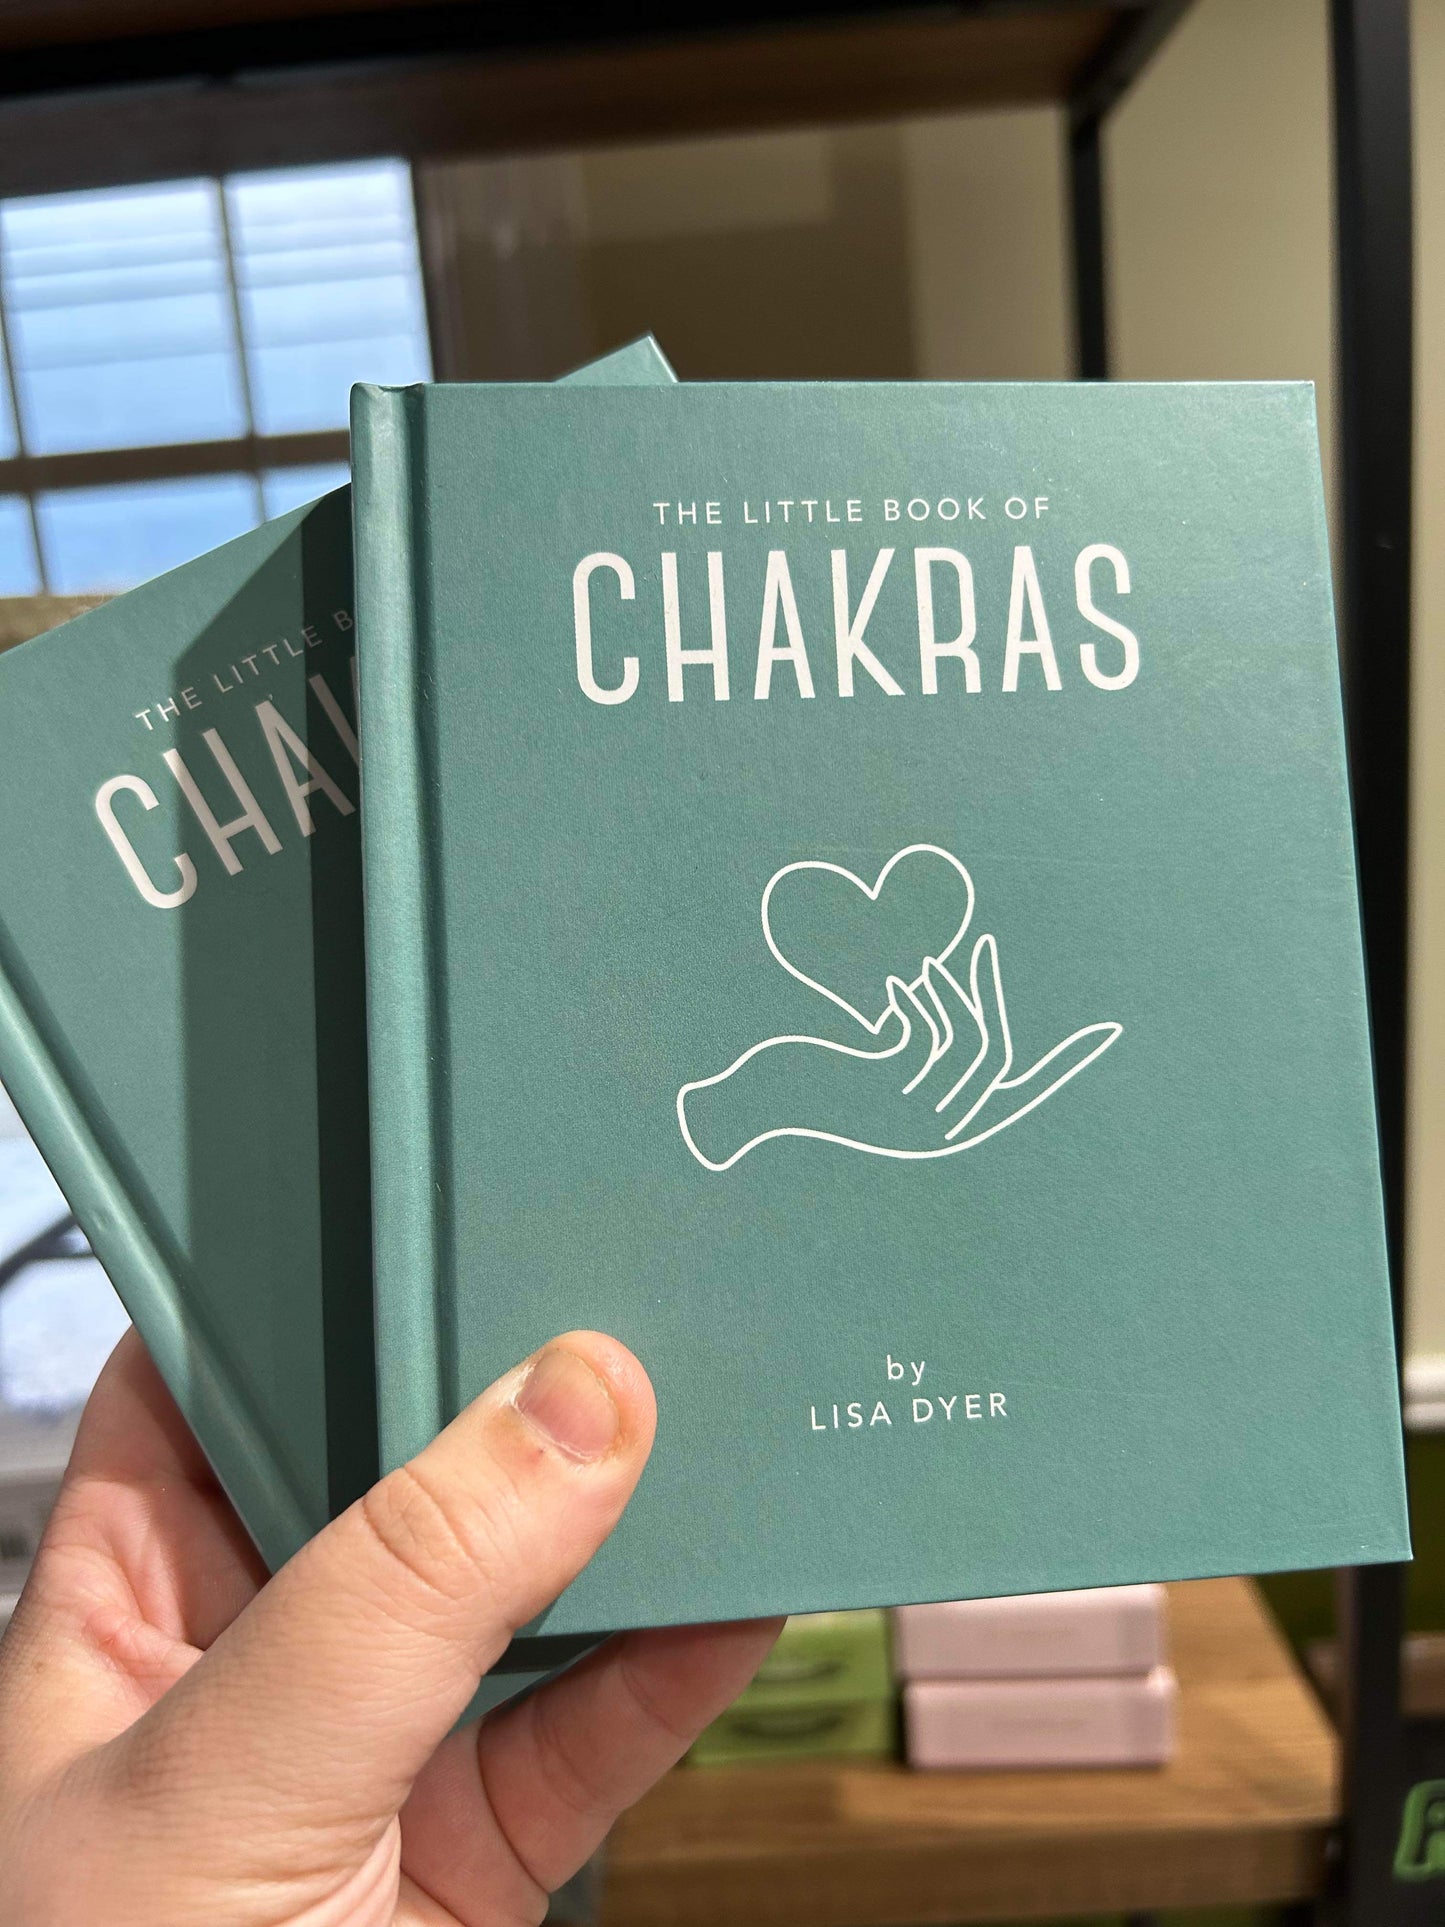 The Little Book of Chakras by Lisa Dyer